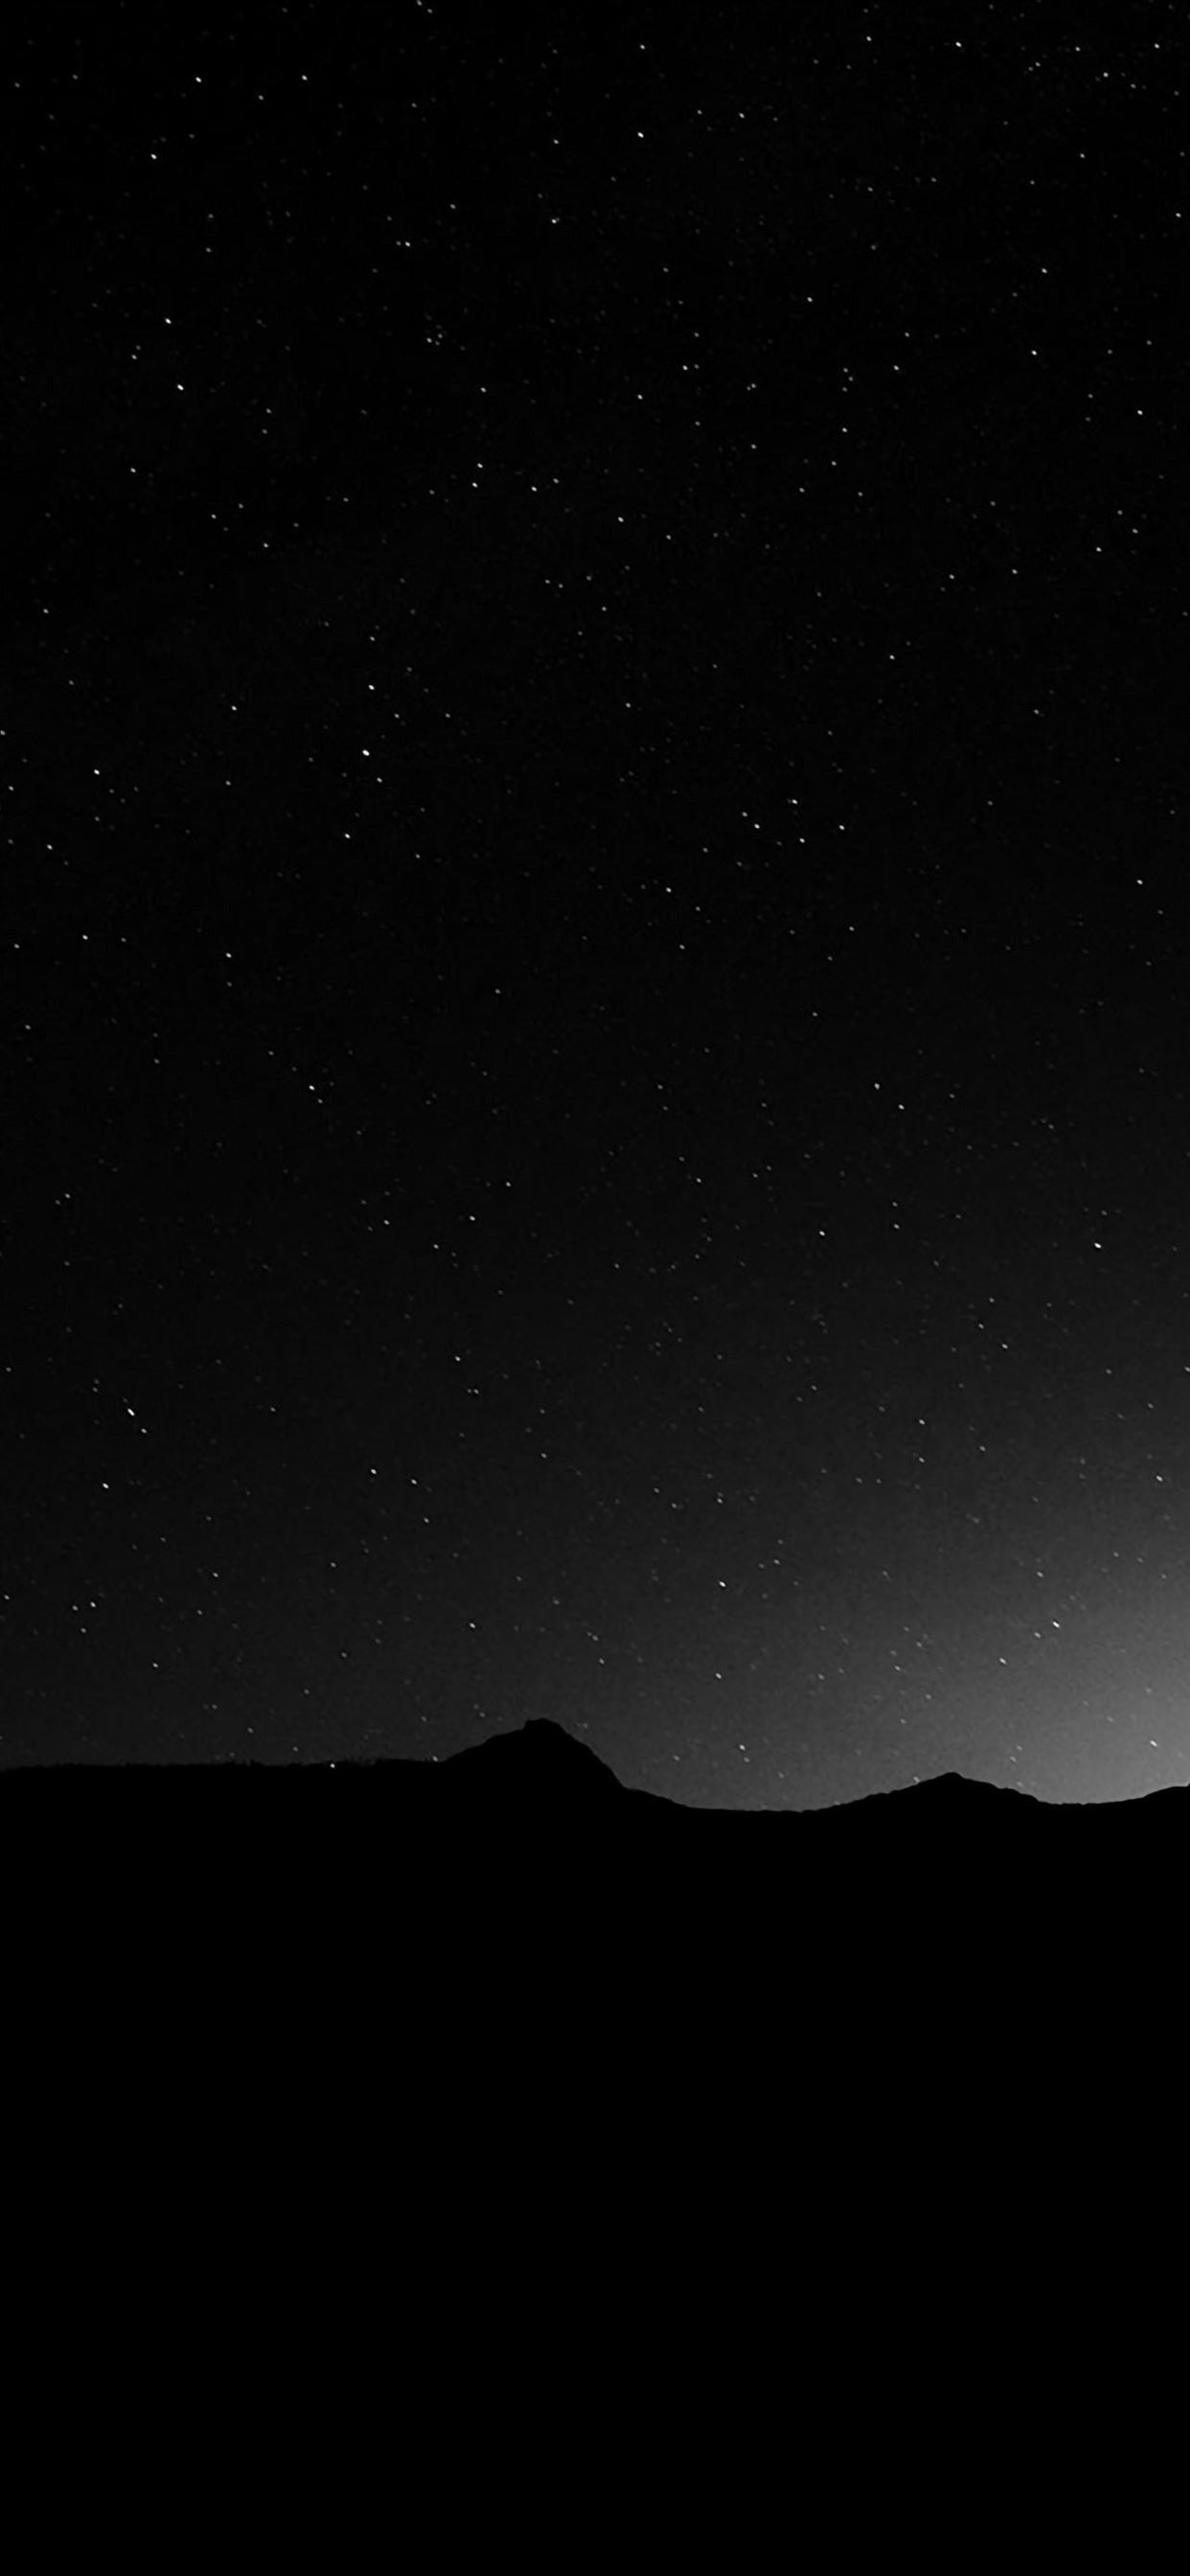 Dark Night Sky Silent Wide Mountain Star Shining iPhone Wallpapers Free  Download